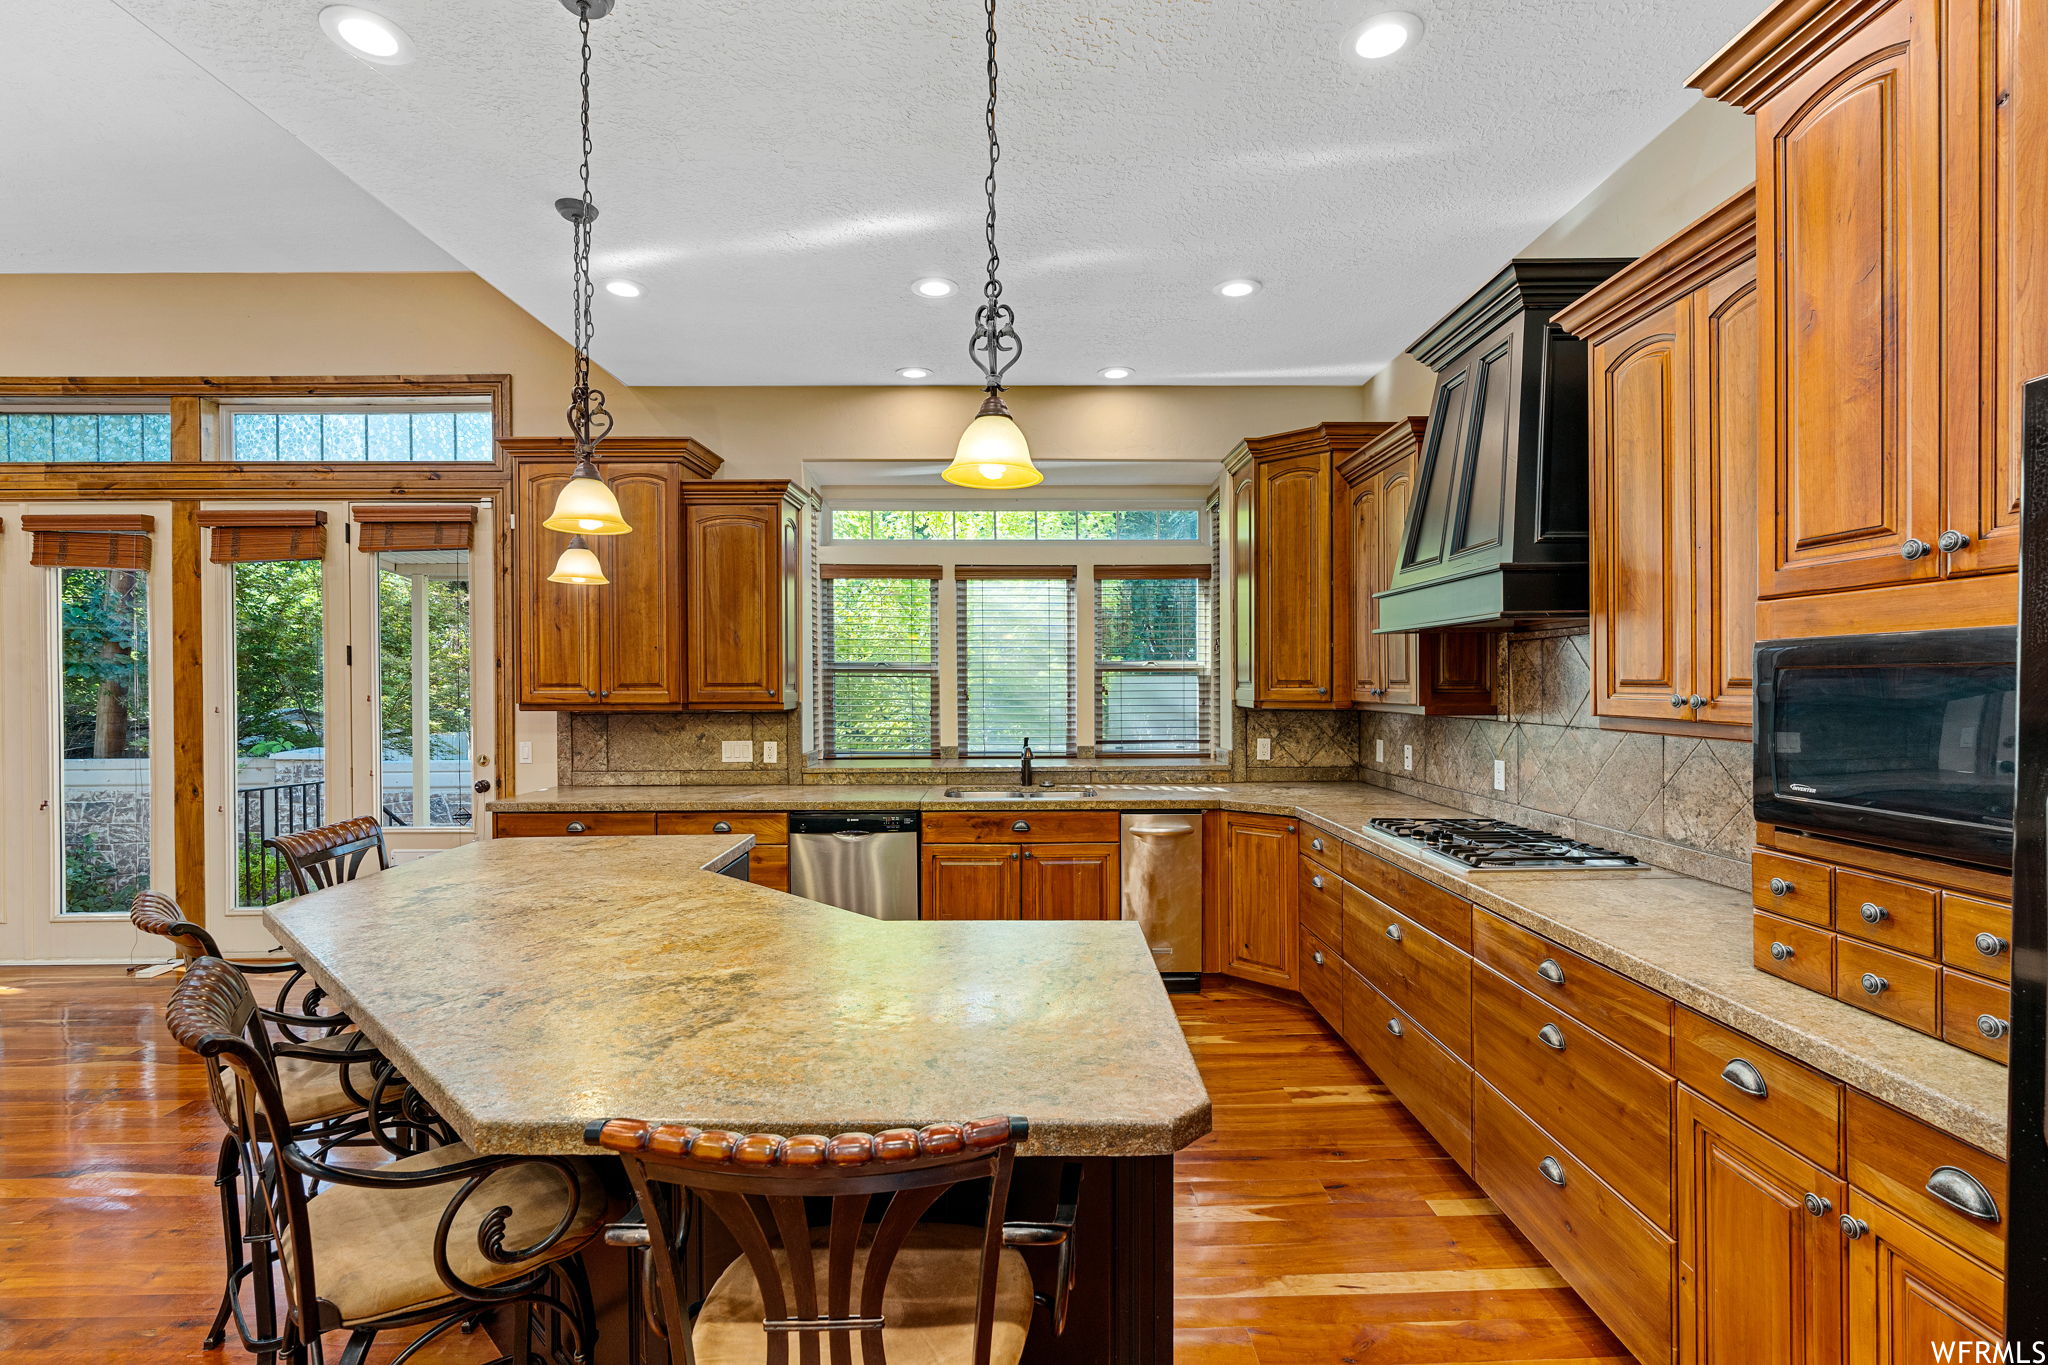 Kitchen with a kitchen island, a healthy amount of sunlight, and premium range hood